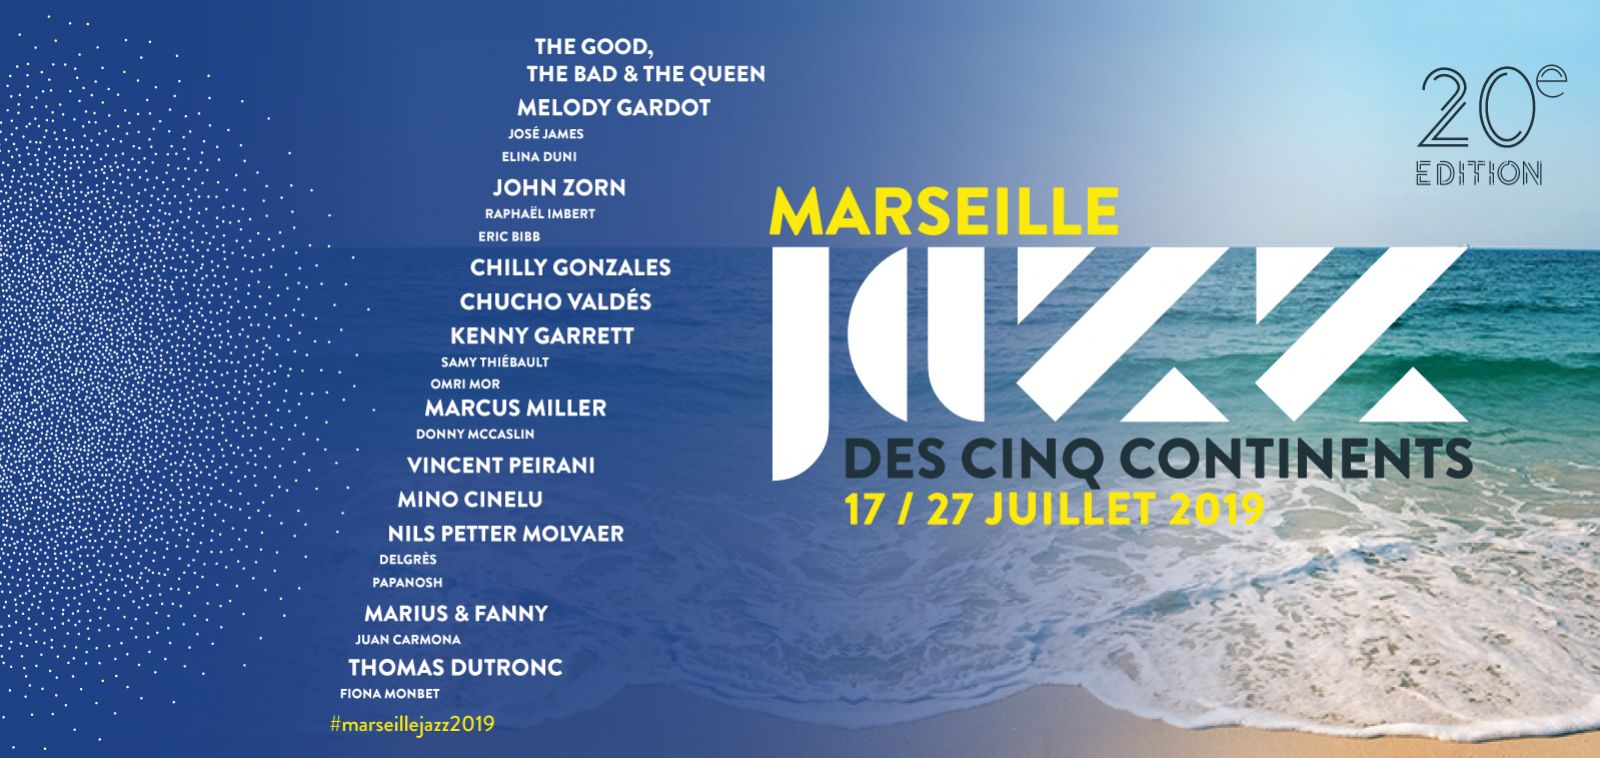 Marseille Jazz of the Five Continents 2019 - An impressive program for the 20th anniversary of the Festival